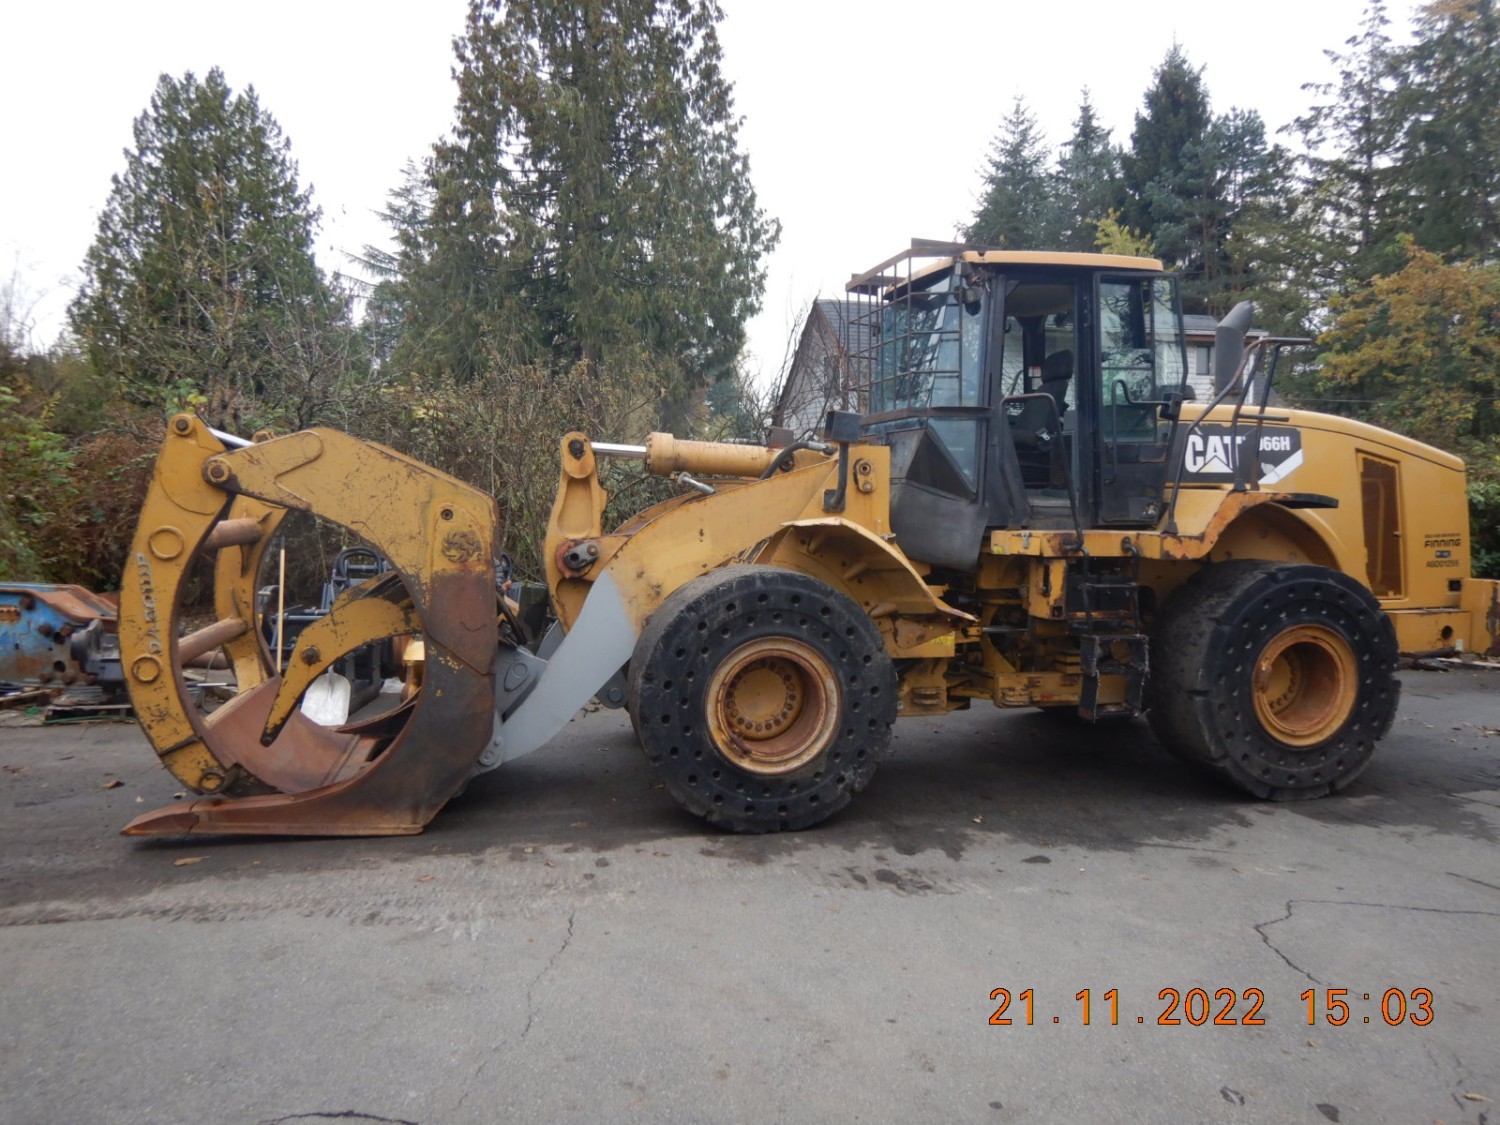 sold-2010-cat-966h-cw-custom-daequip-dual-log-or-pipe-grapple-with-internal-grapple-to-keep-pipe-logs-poles-secure-big-10